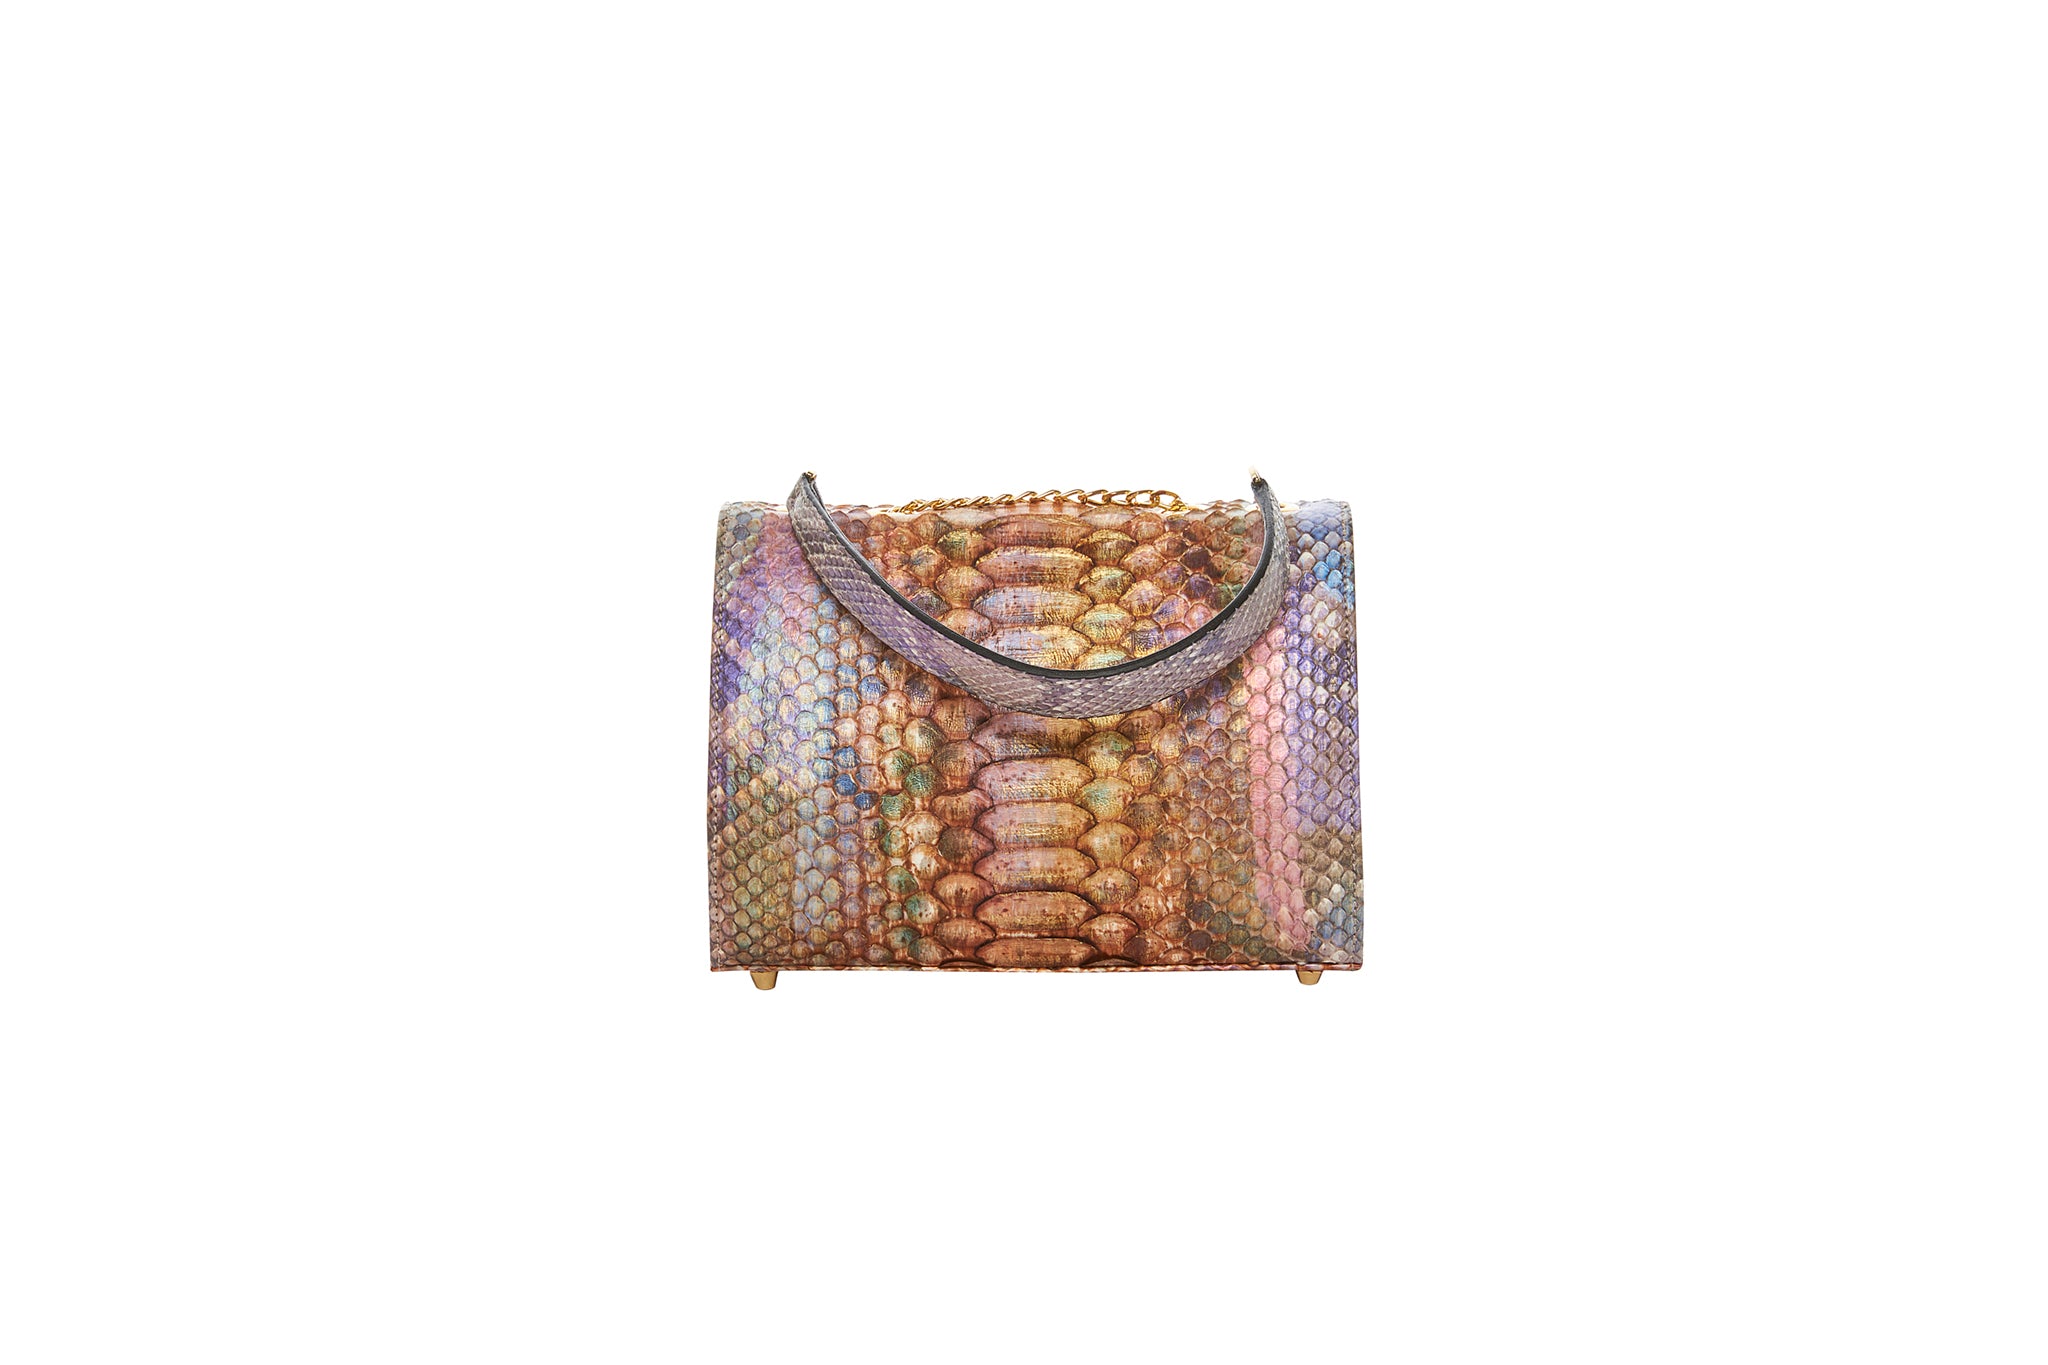 Authentic Chanel Flap Bag Exotic Iridescent